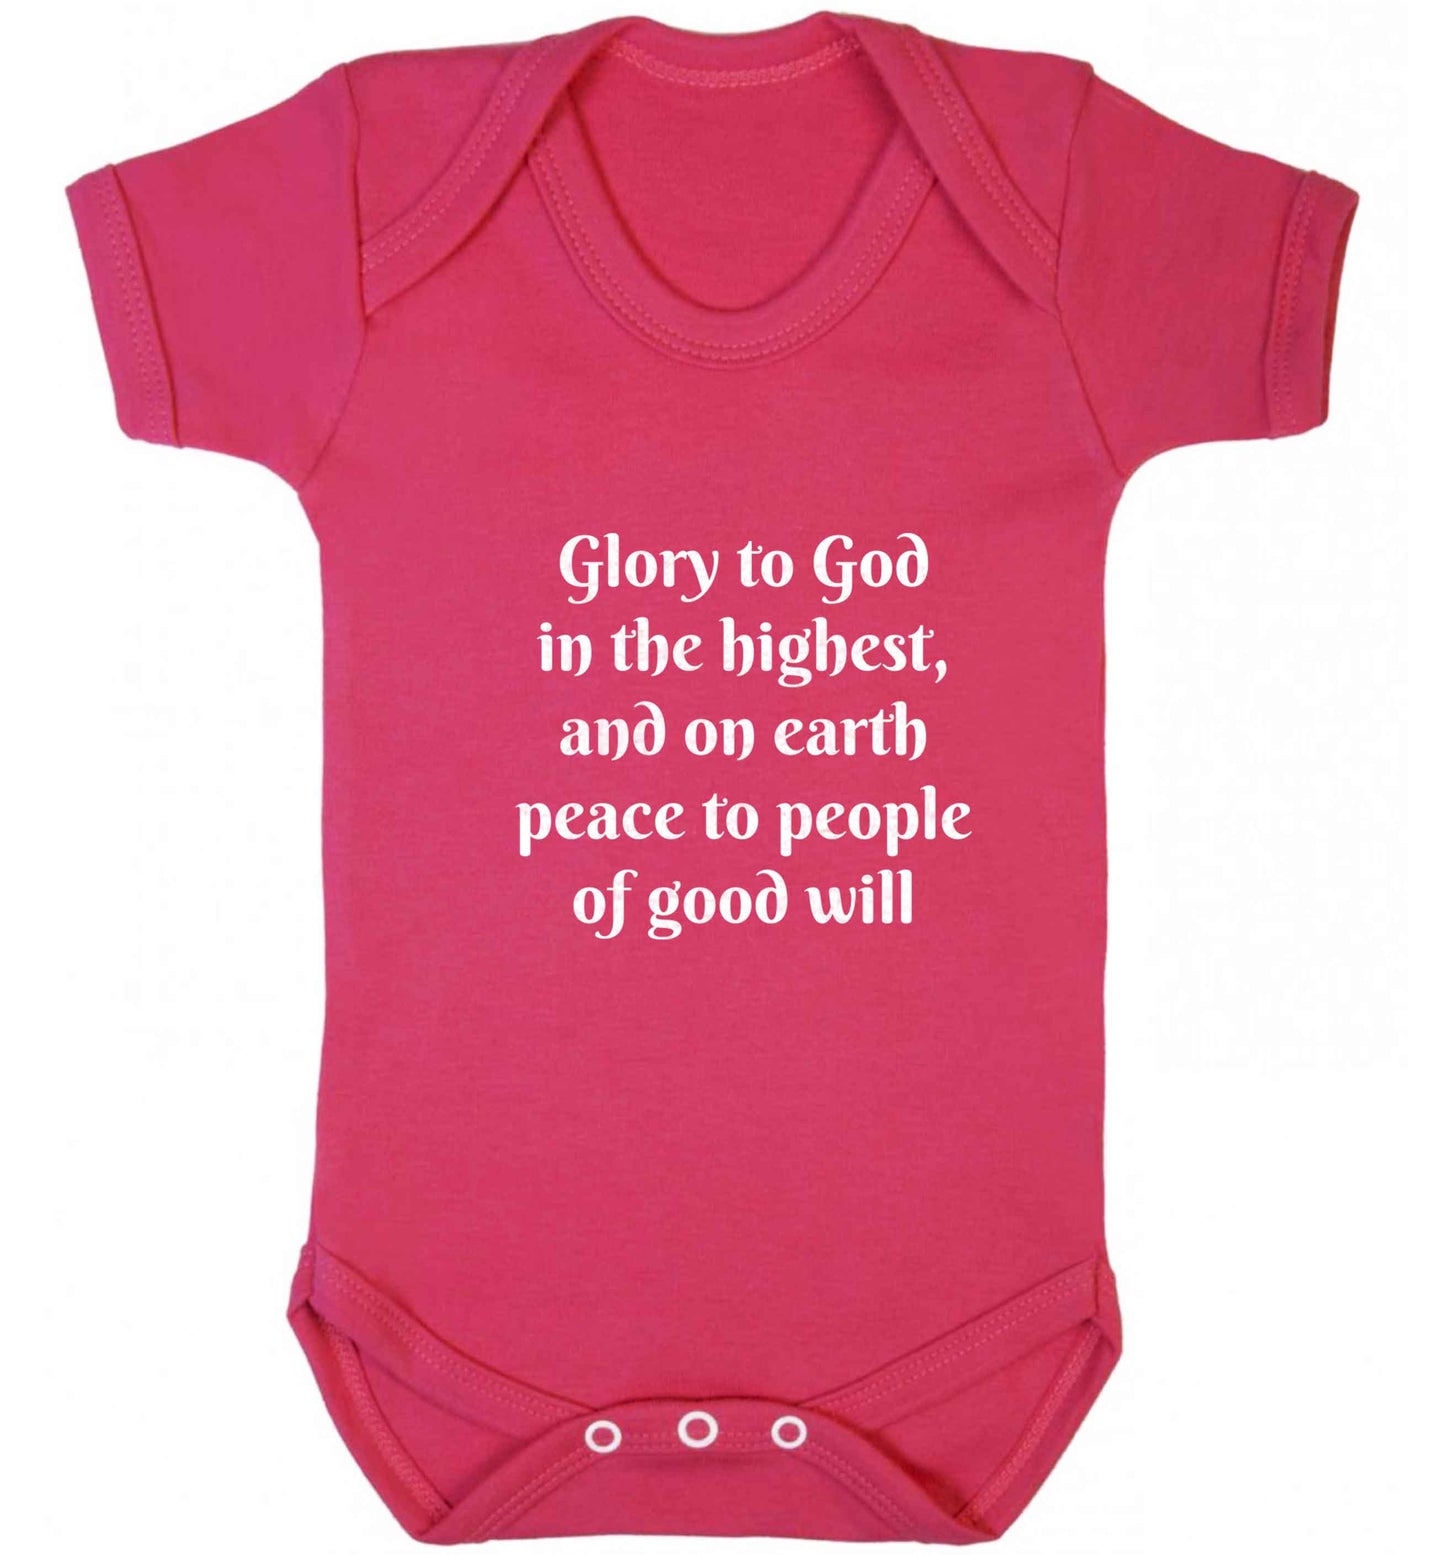 Glory to God in the highest, and on earth peace to people of good will baby vest dark pink 18-24 months